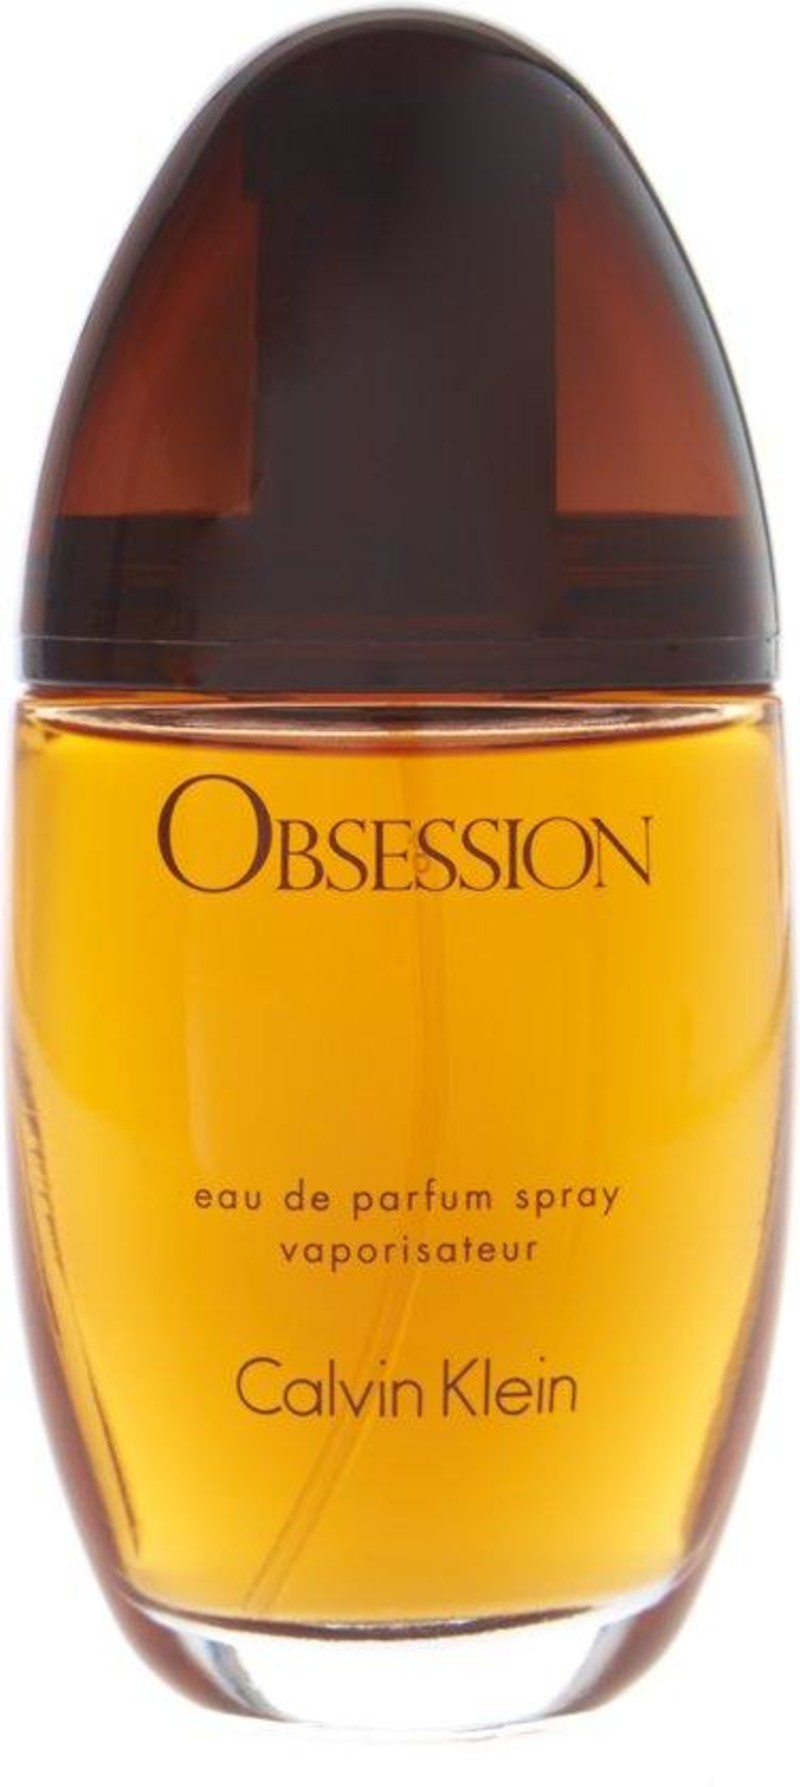 acre knal Taalkunde Calvin Klein Obsession 100 ml - Eau de Parfum - Damesparfum | Calvin Klein  Obsession for Women - We Are Eves: honest cosmetic reviews.